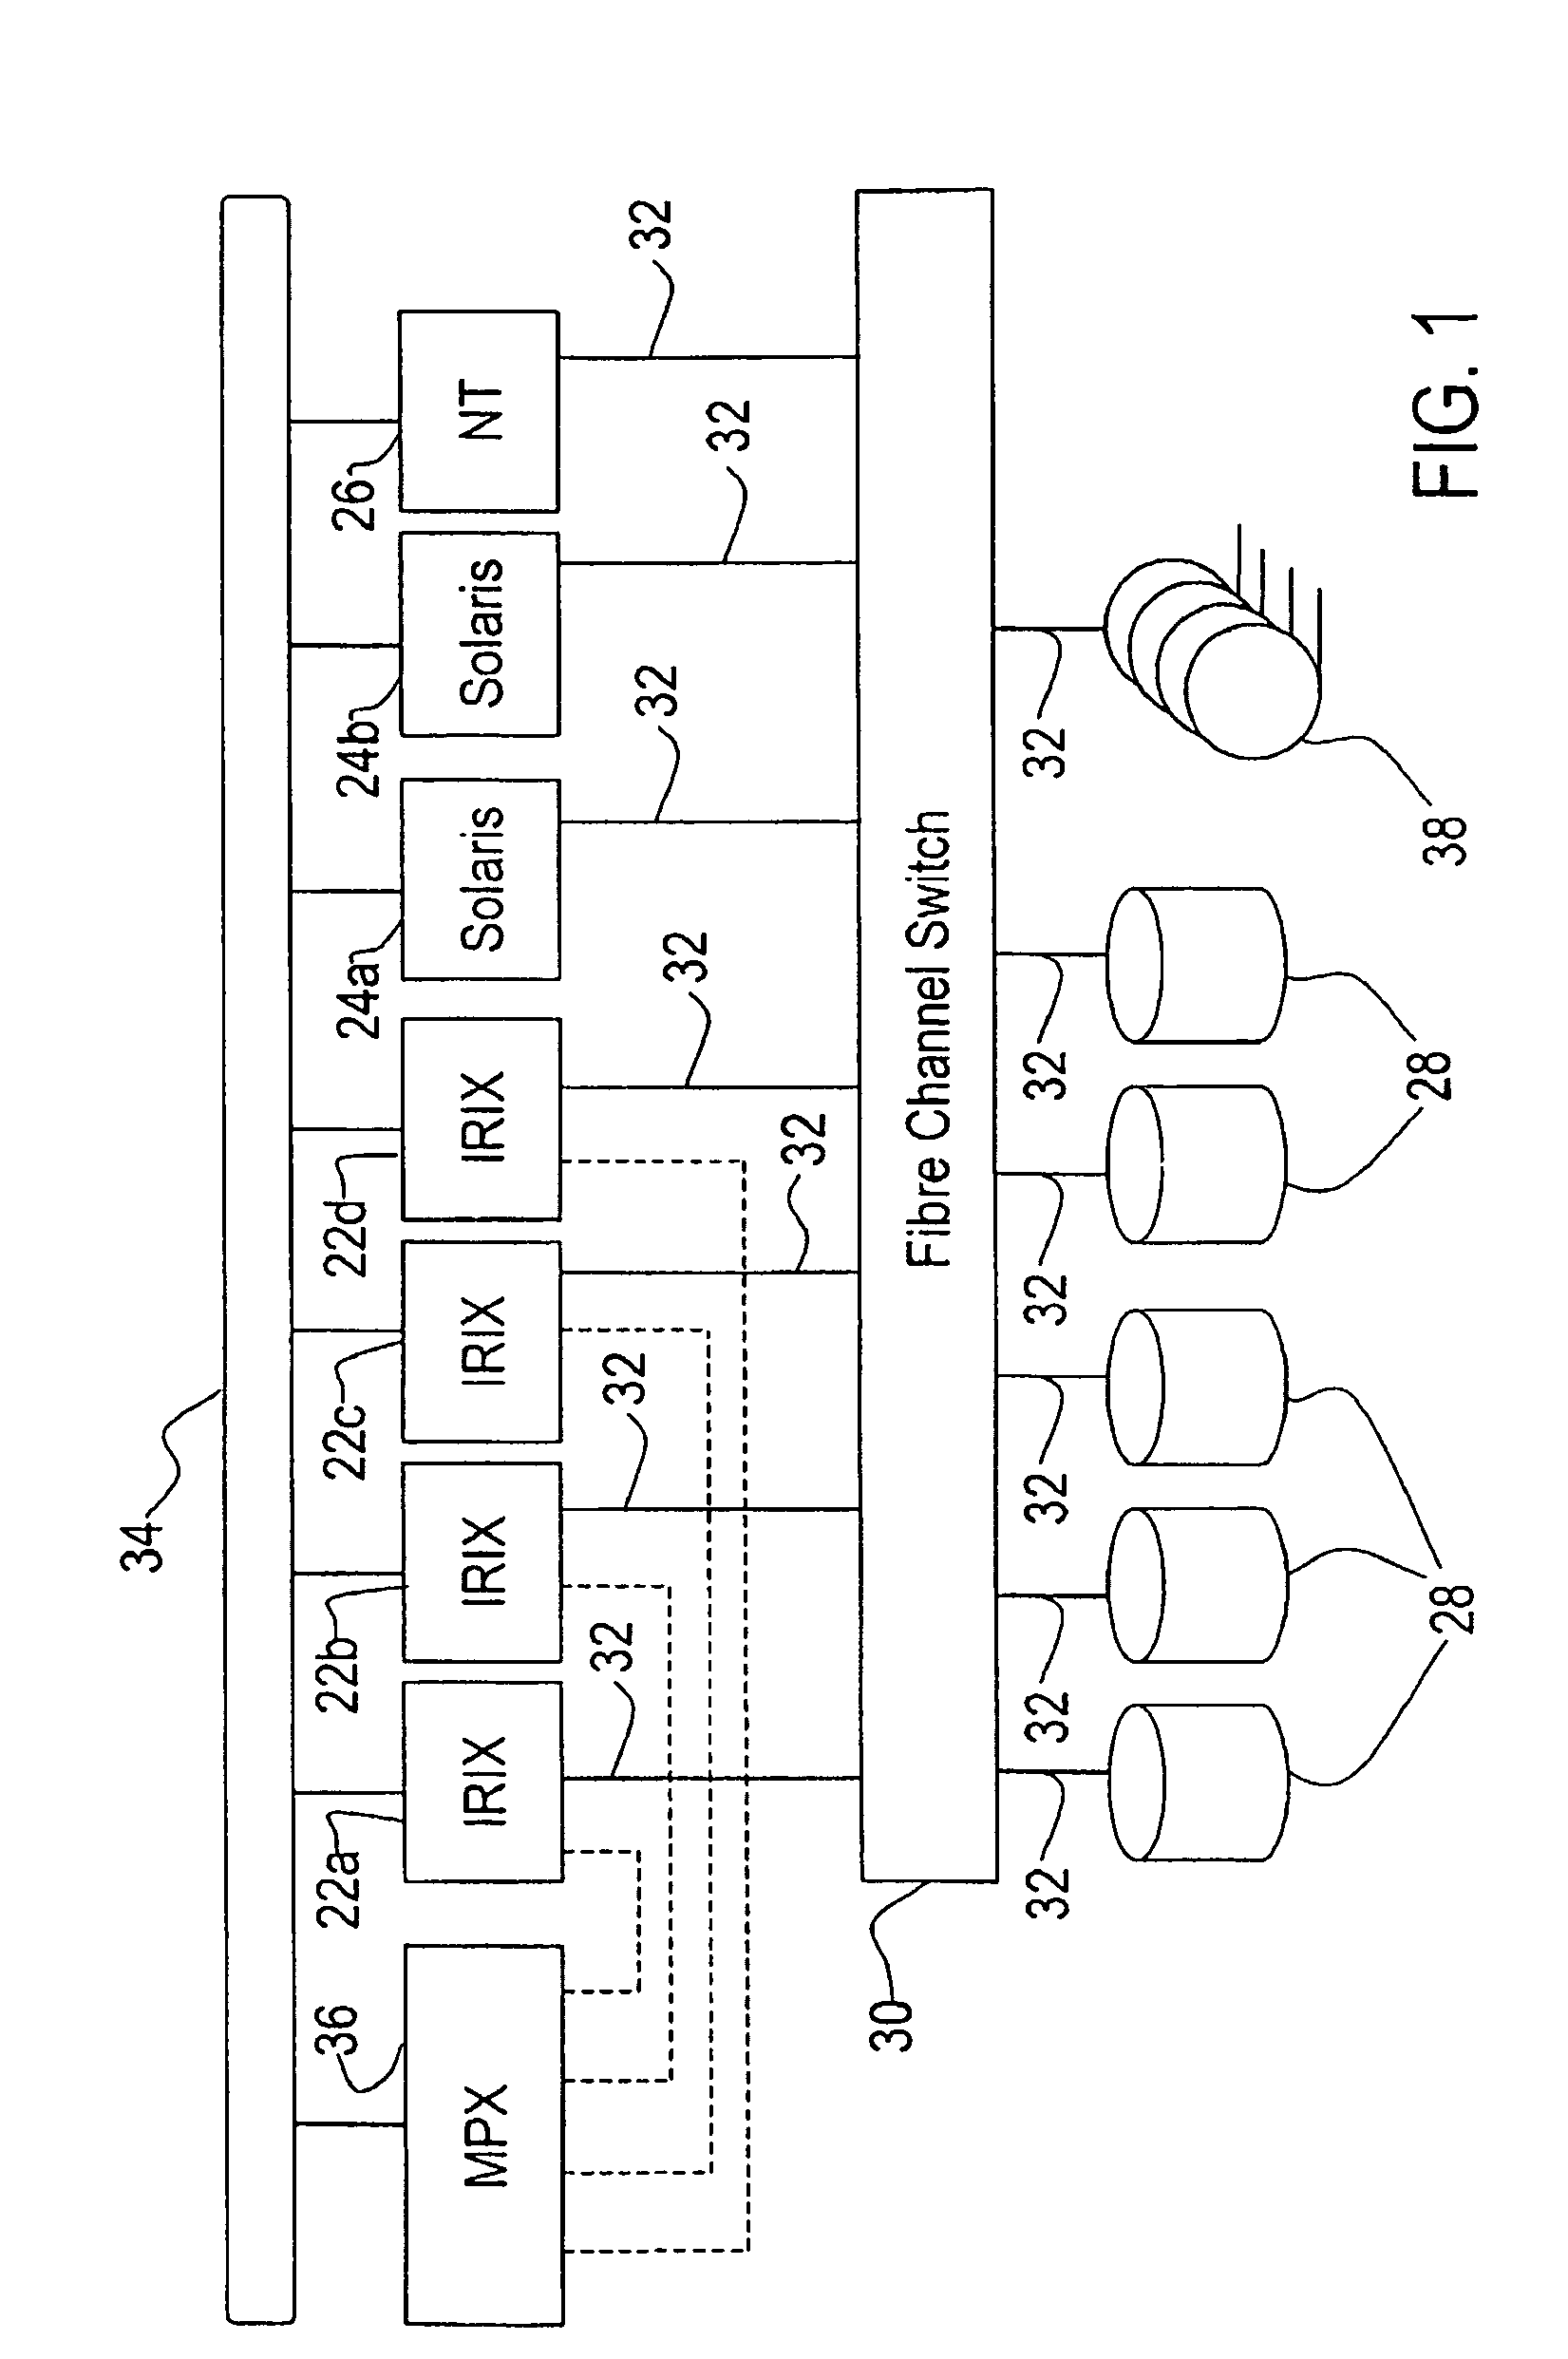 Method for empirically determining a qualified bandwidth of file storage for a shared filed system